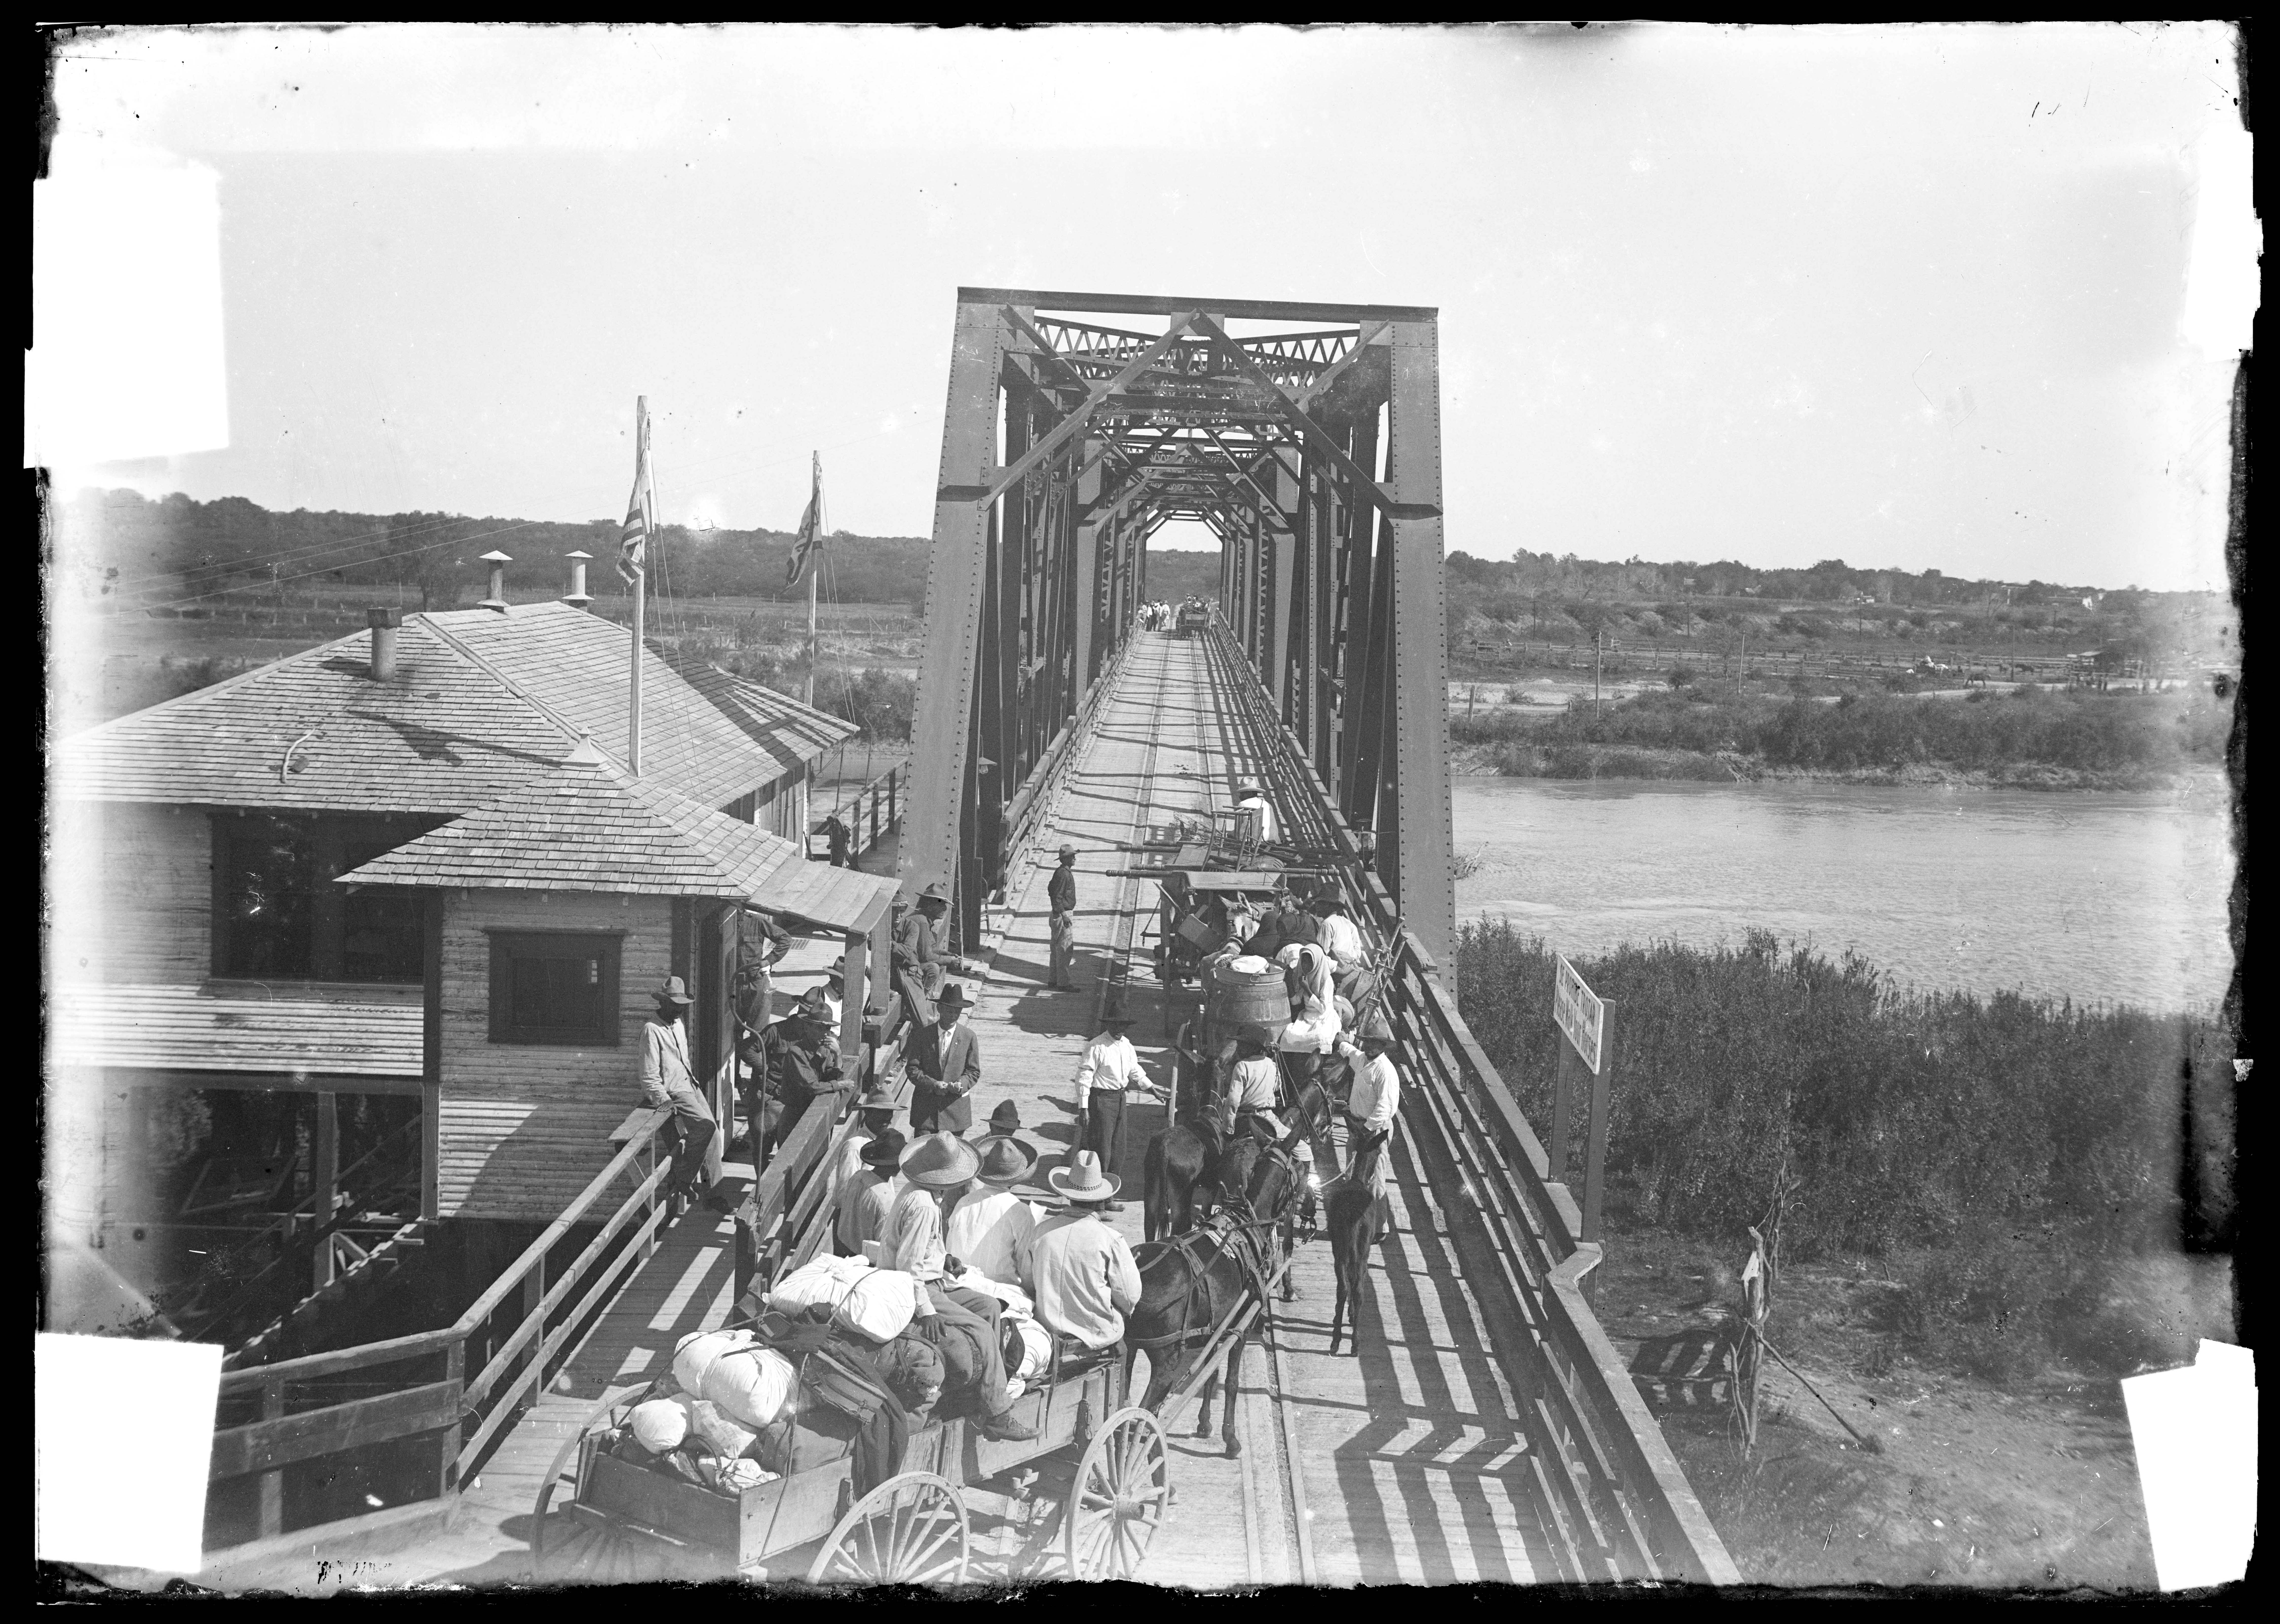 Refugees flee to Mexico to escape violence along the Texas-Mexico border in this early 20th-century photograph. Image courtesy of the Robert Runyon Photograph Collection, The Dolph Briscoe Center for American History, The University of Texas at Austin.